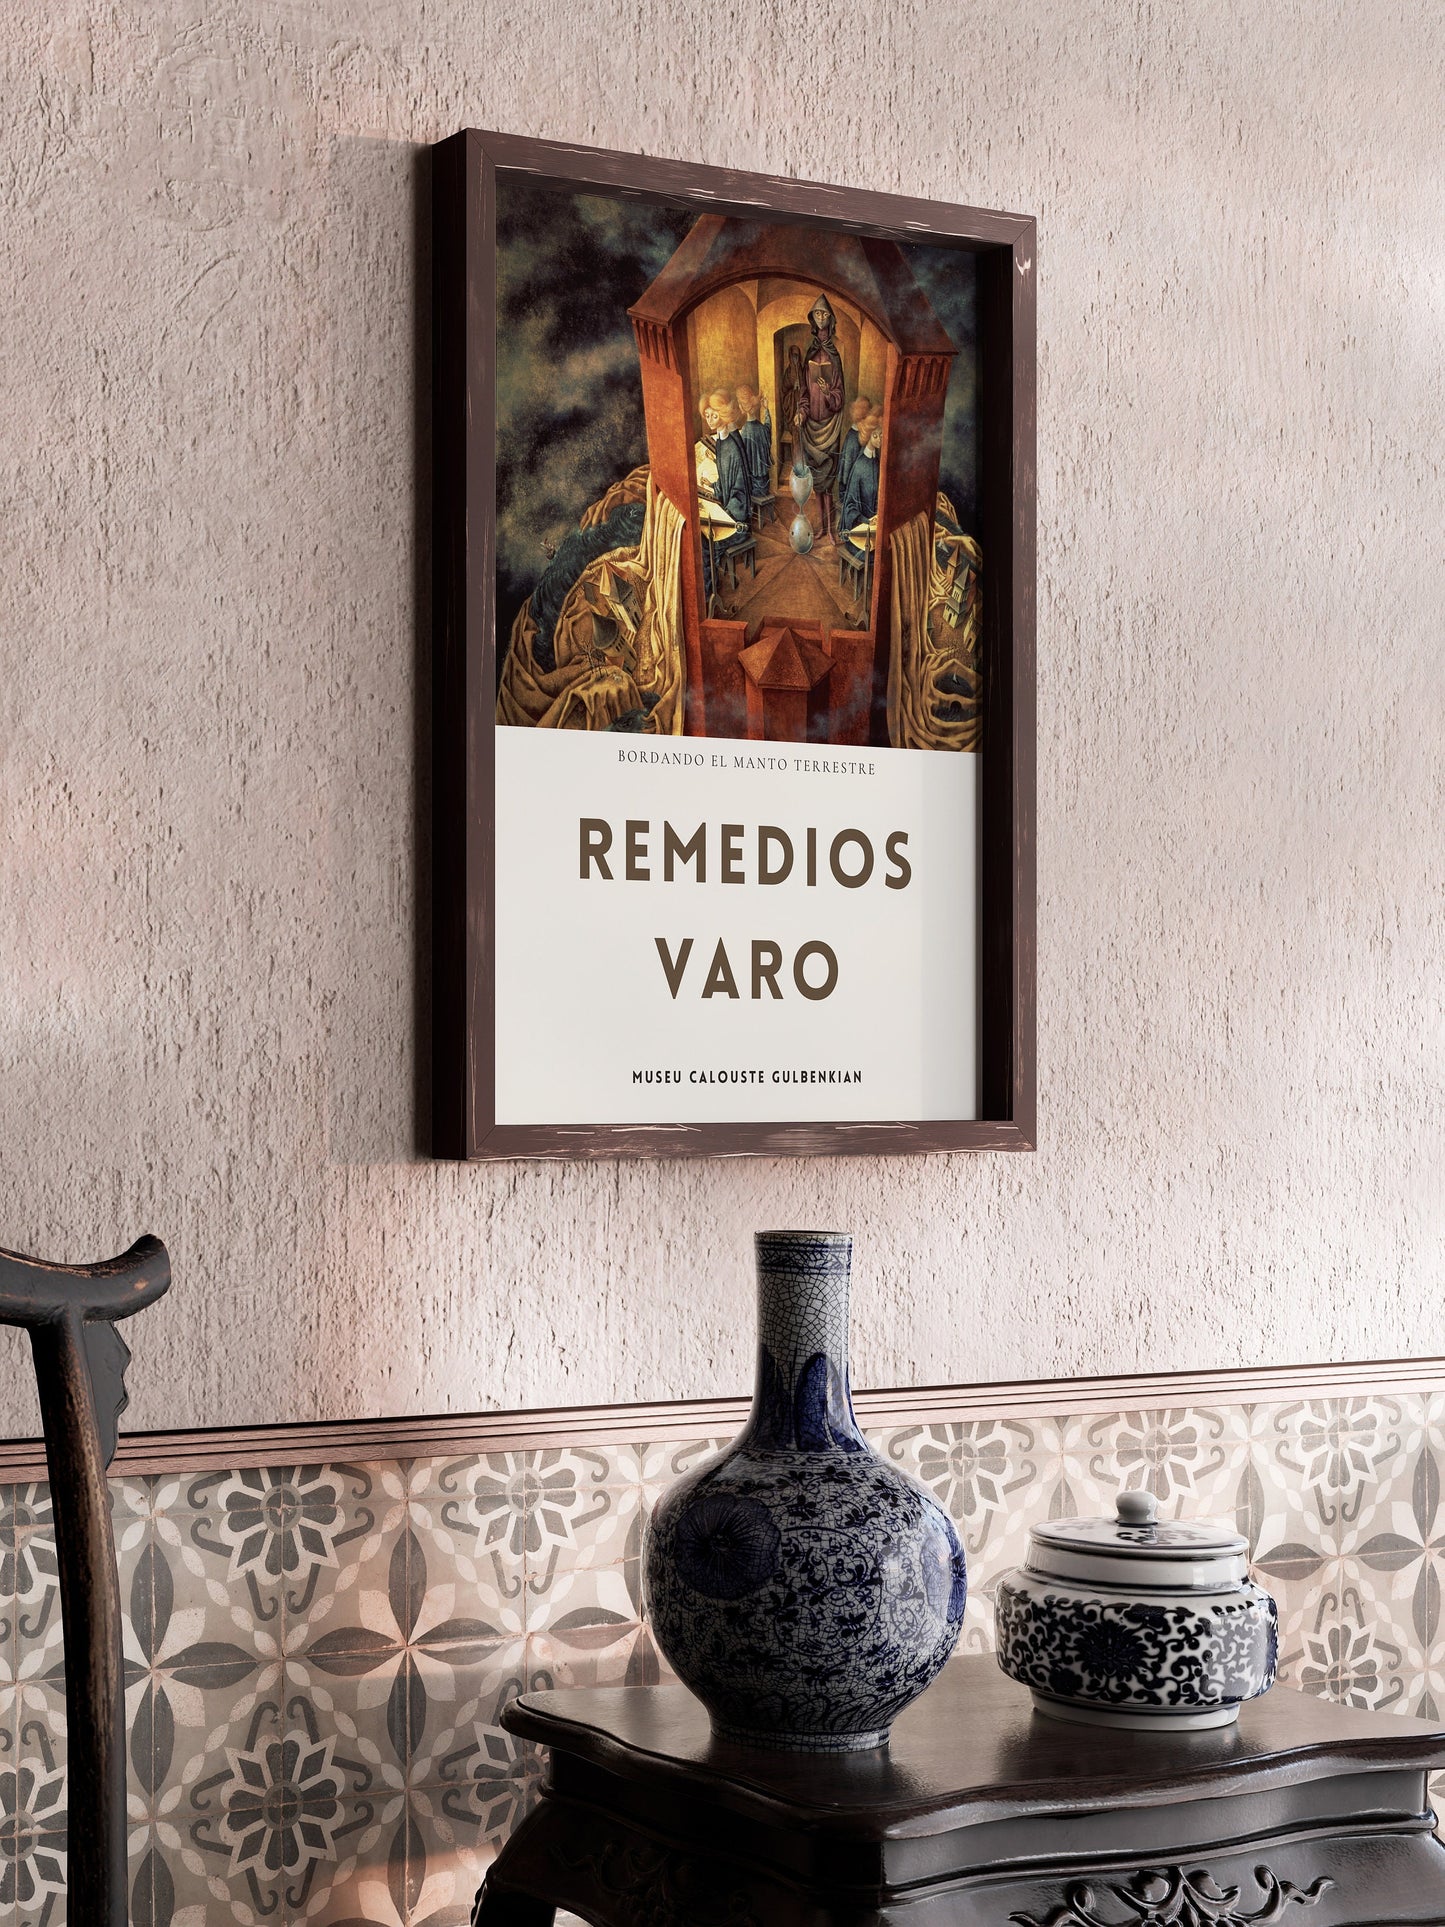 Remedios Varo Embroidering Fine Surreal Art Famous Mexican Iconic Painting Vintage Ready to hang Framed Home Office Decor Print Gift Idea